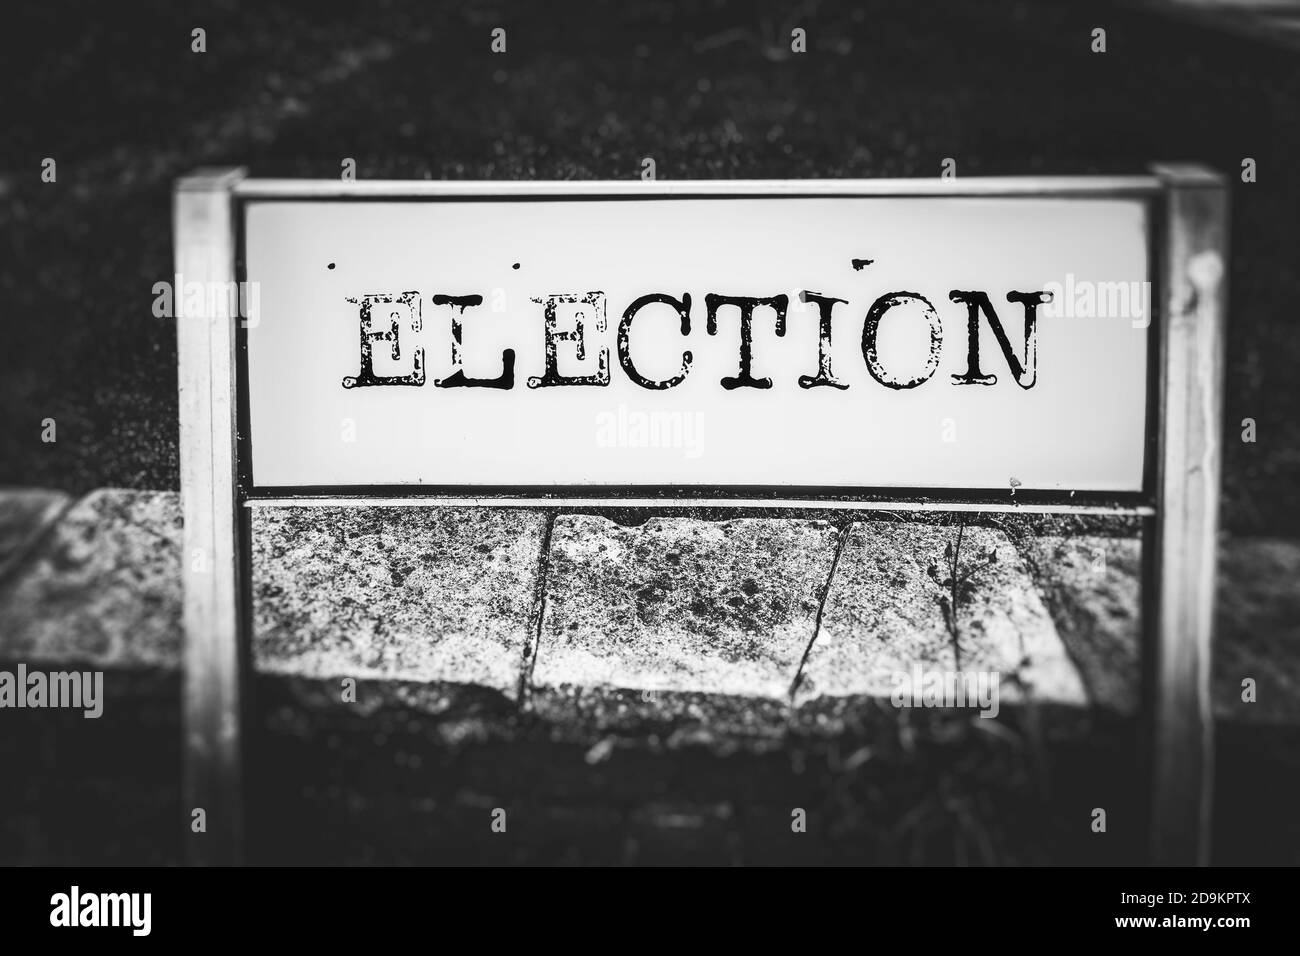 Election on a road sign Stock Photo